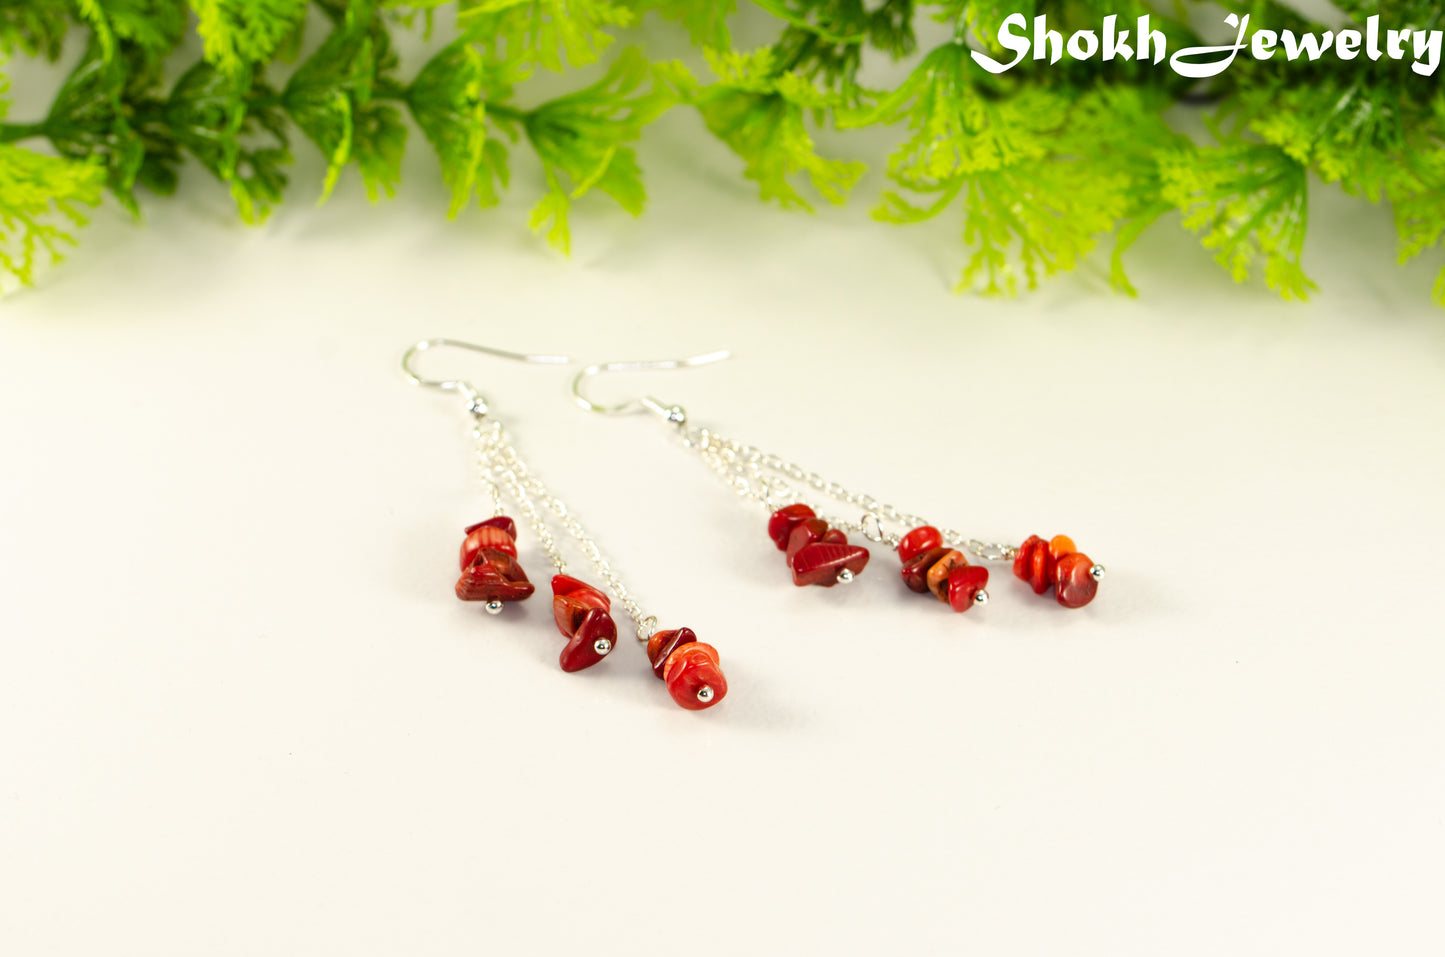 Long Silver Plated Chain and Red Coral Chip Earrings.